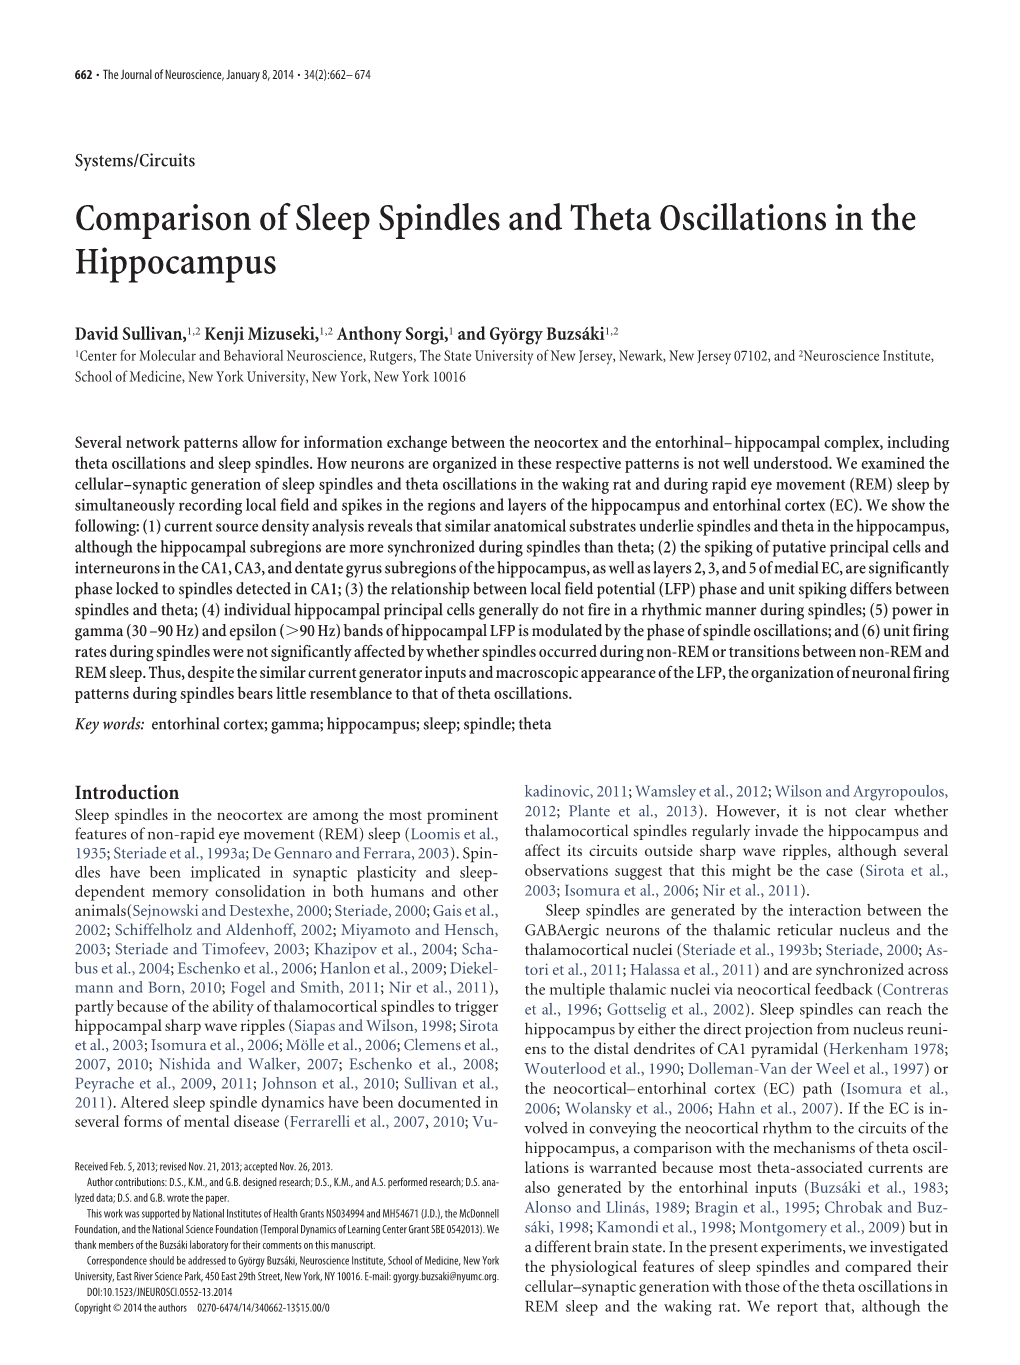 Comparison of Sleep Spindles and Theta Oscillations in the Hippocampus